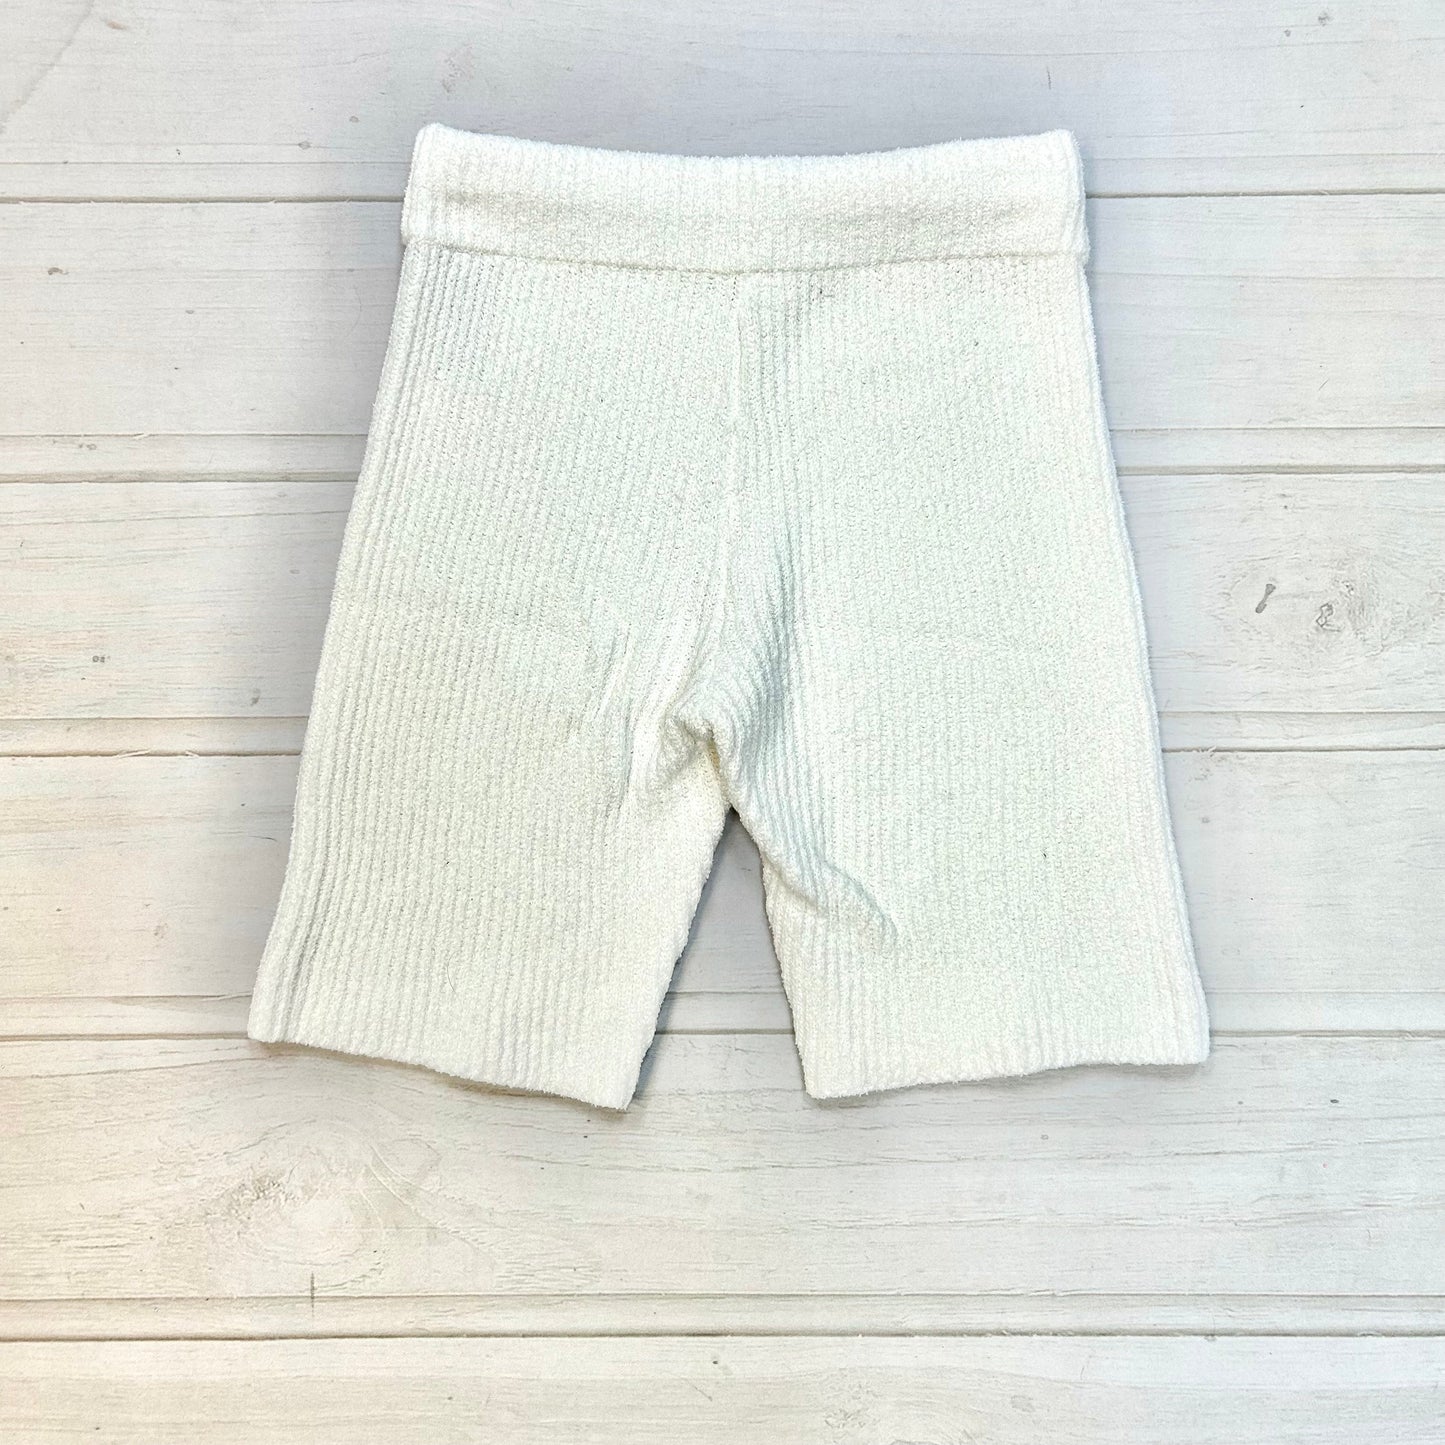 Shorts Designer By Rag And Bone  Size: S